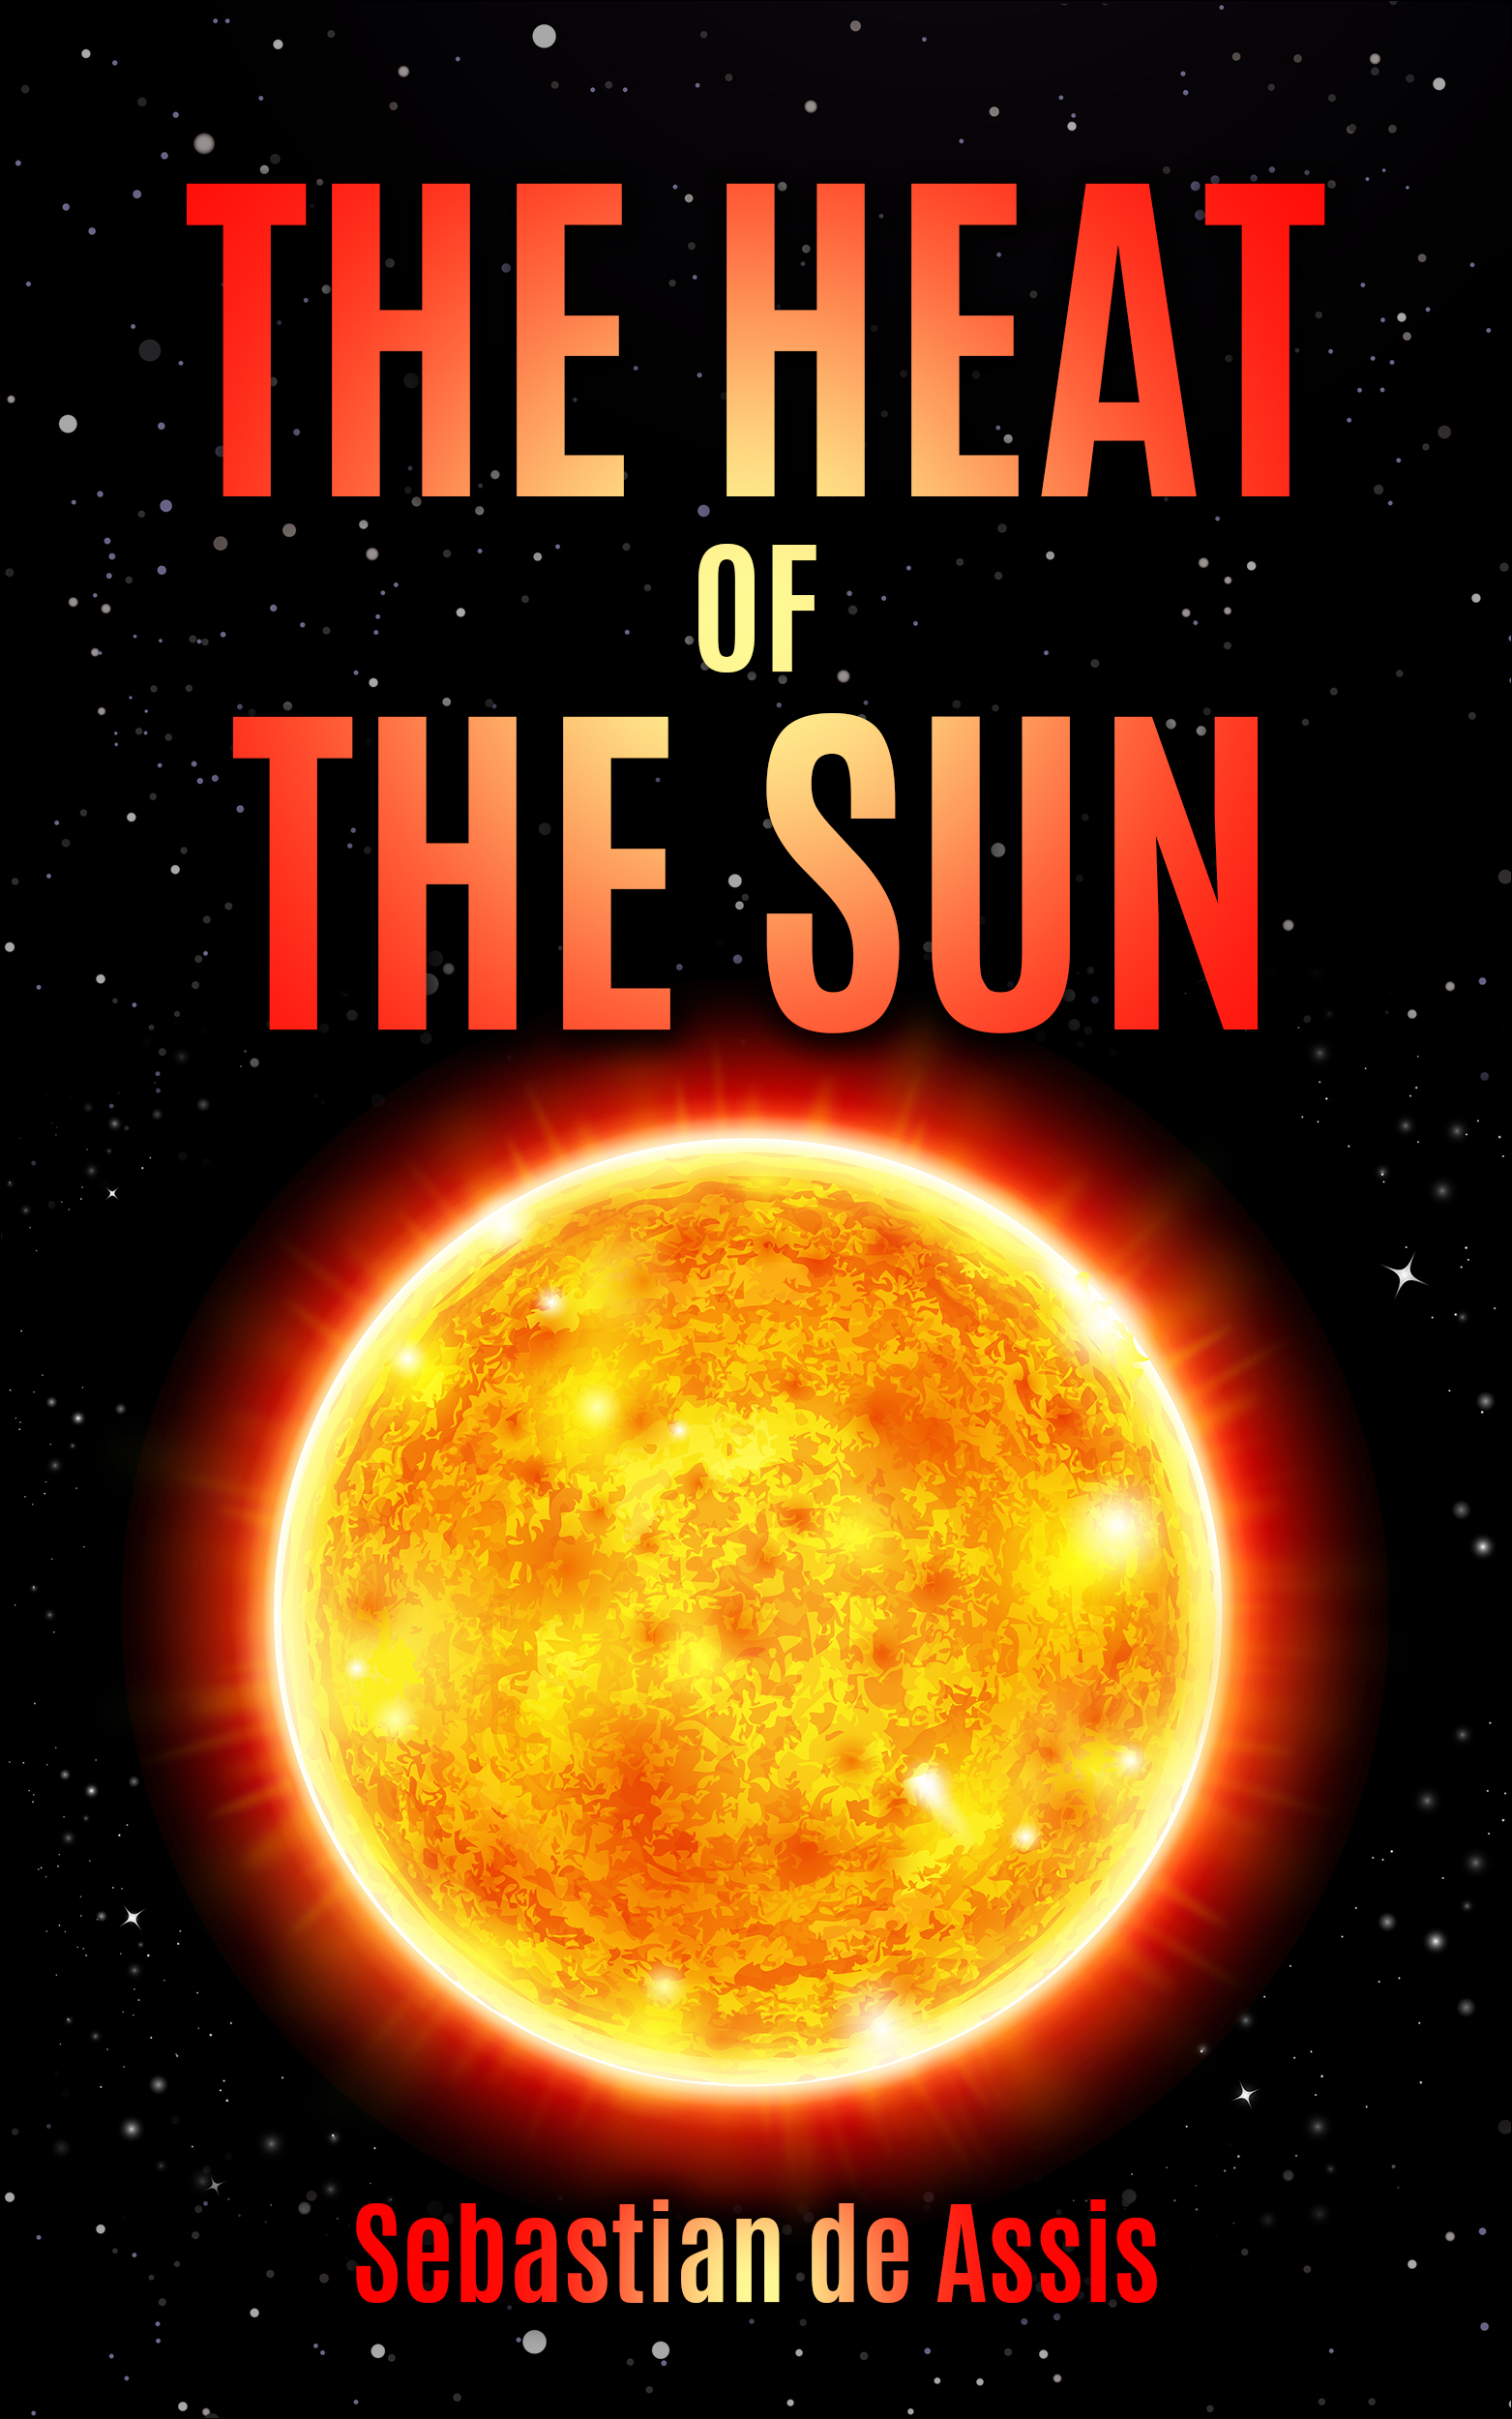 https://www.sebastiandeassis.com/wp-content/uploads/2019/02/THE-HEAT-OF-THE-SUN-Front-Book-Cover.jpg